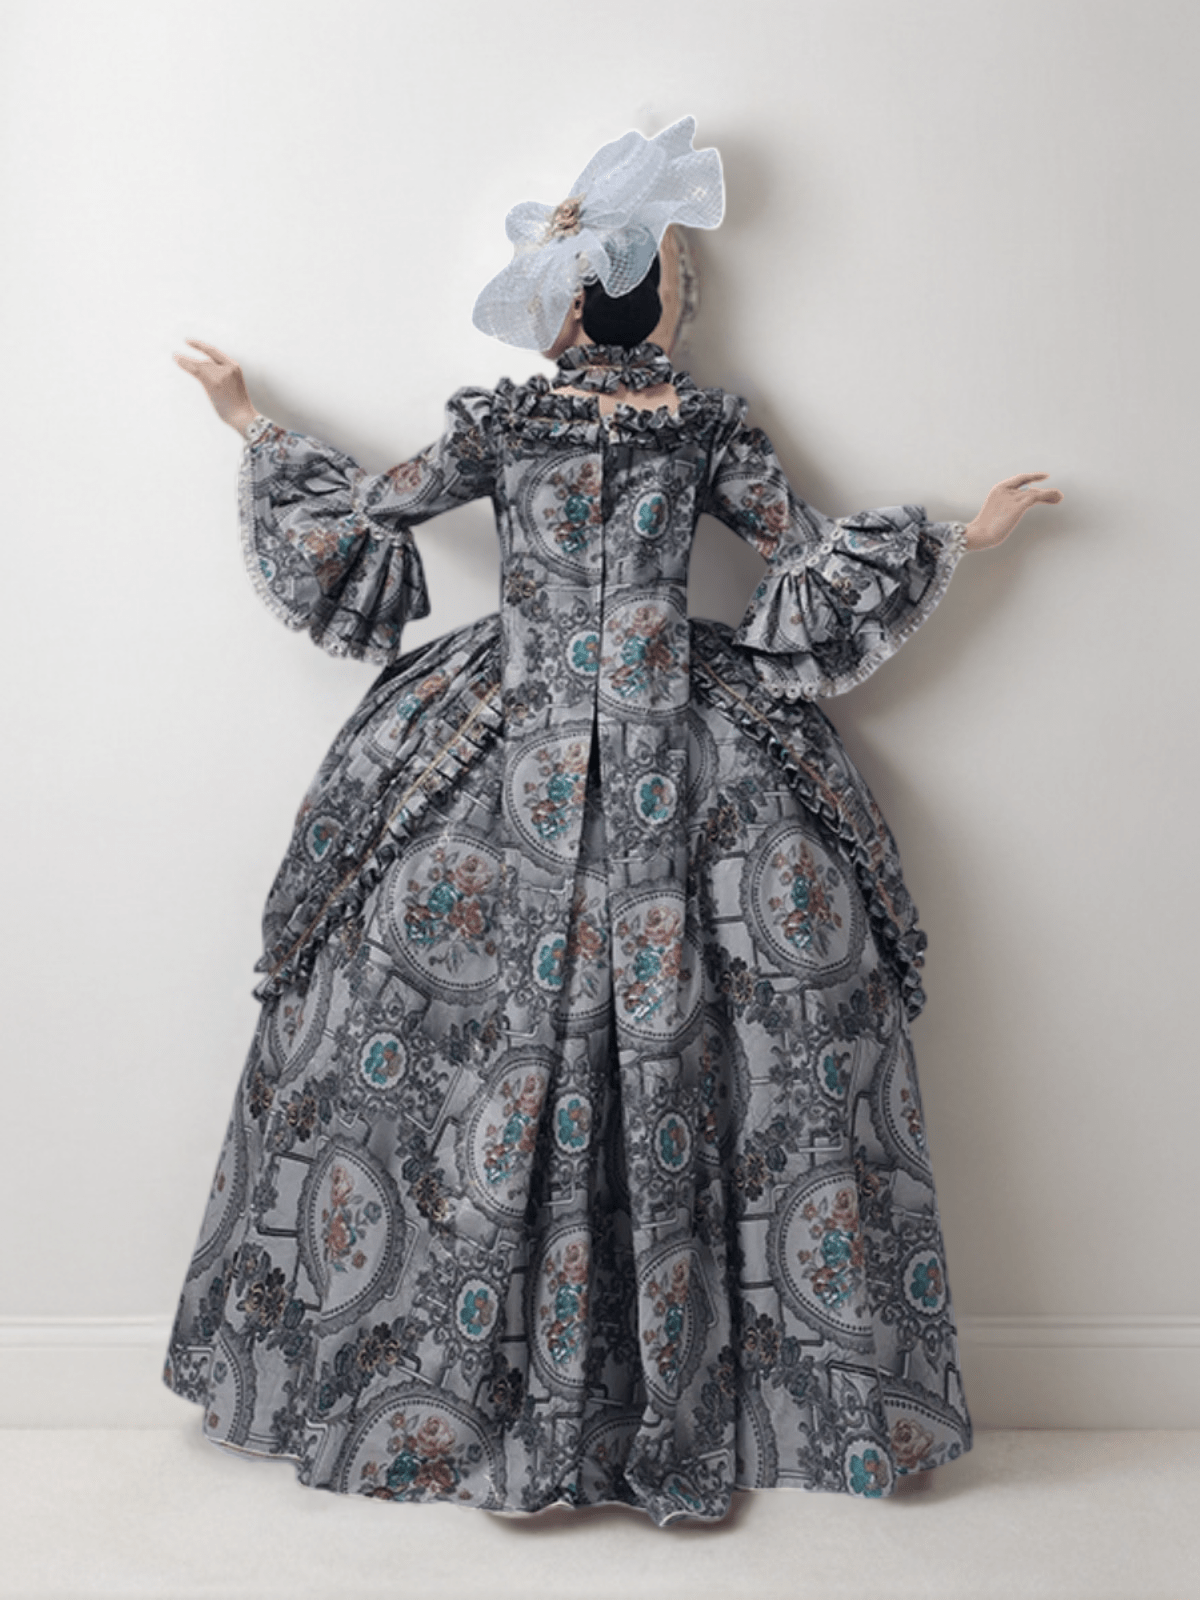 Majestic Grey Rococo Style Dress – Exquisite Baroque Print Ball Gown with Lace Detailing Plus Size - WonderlandByLilian